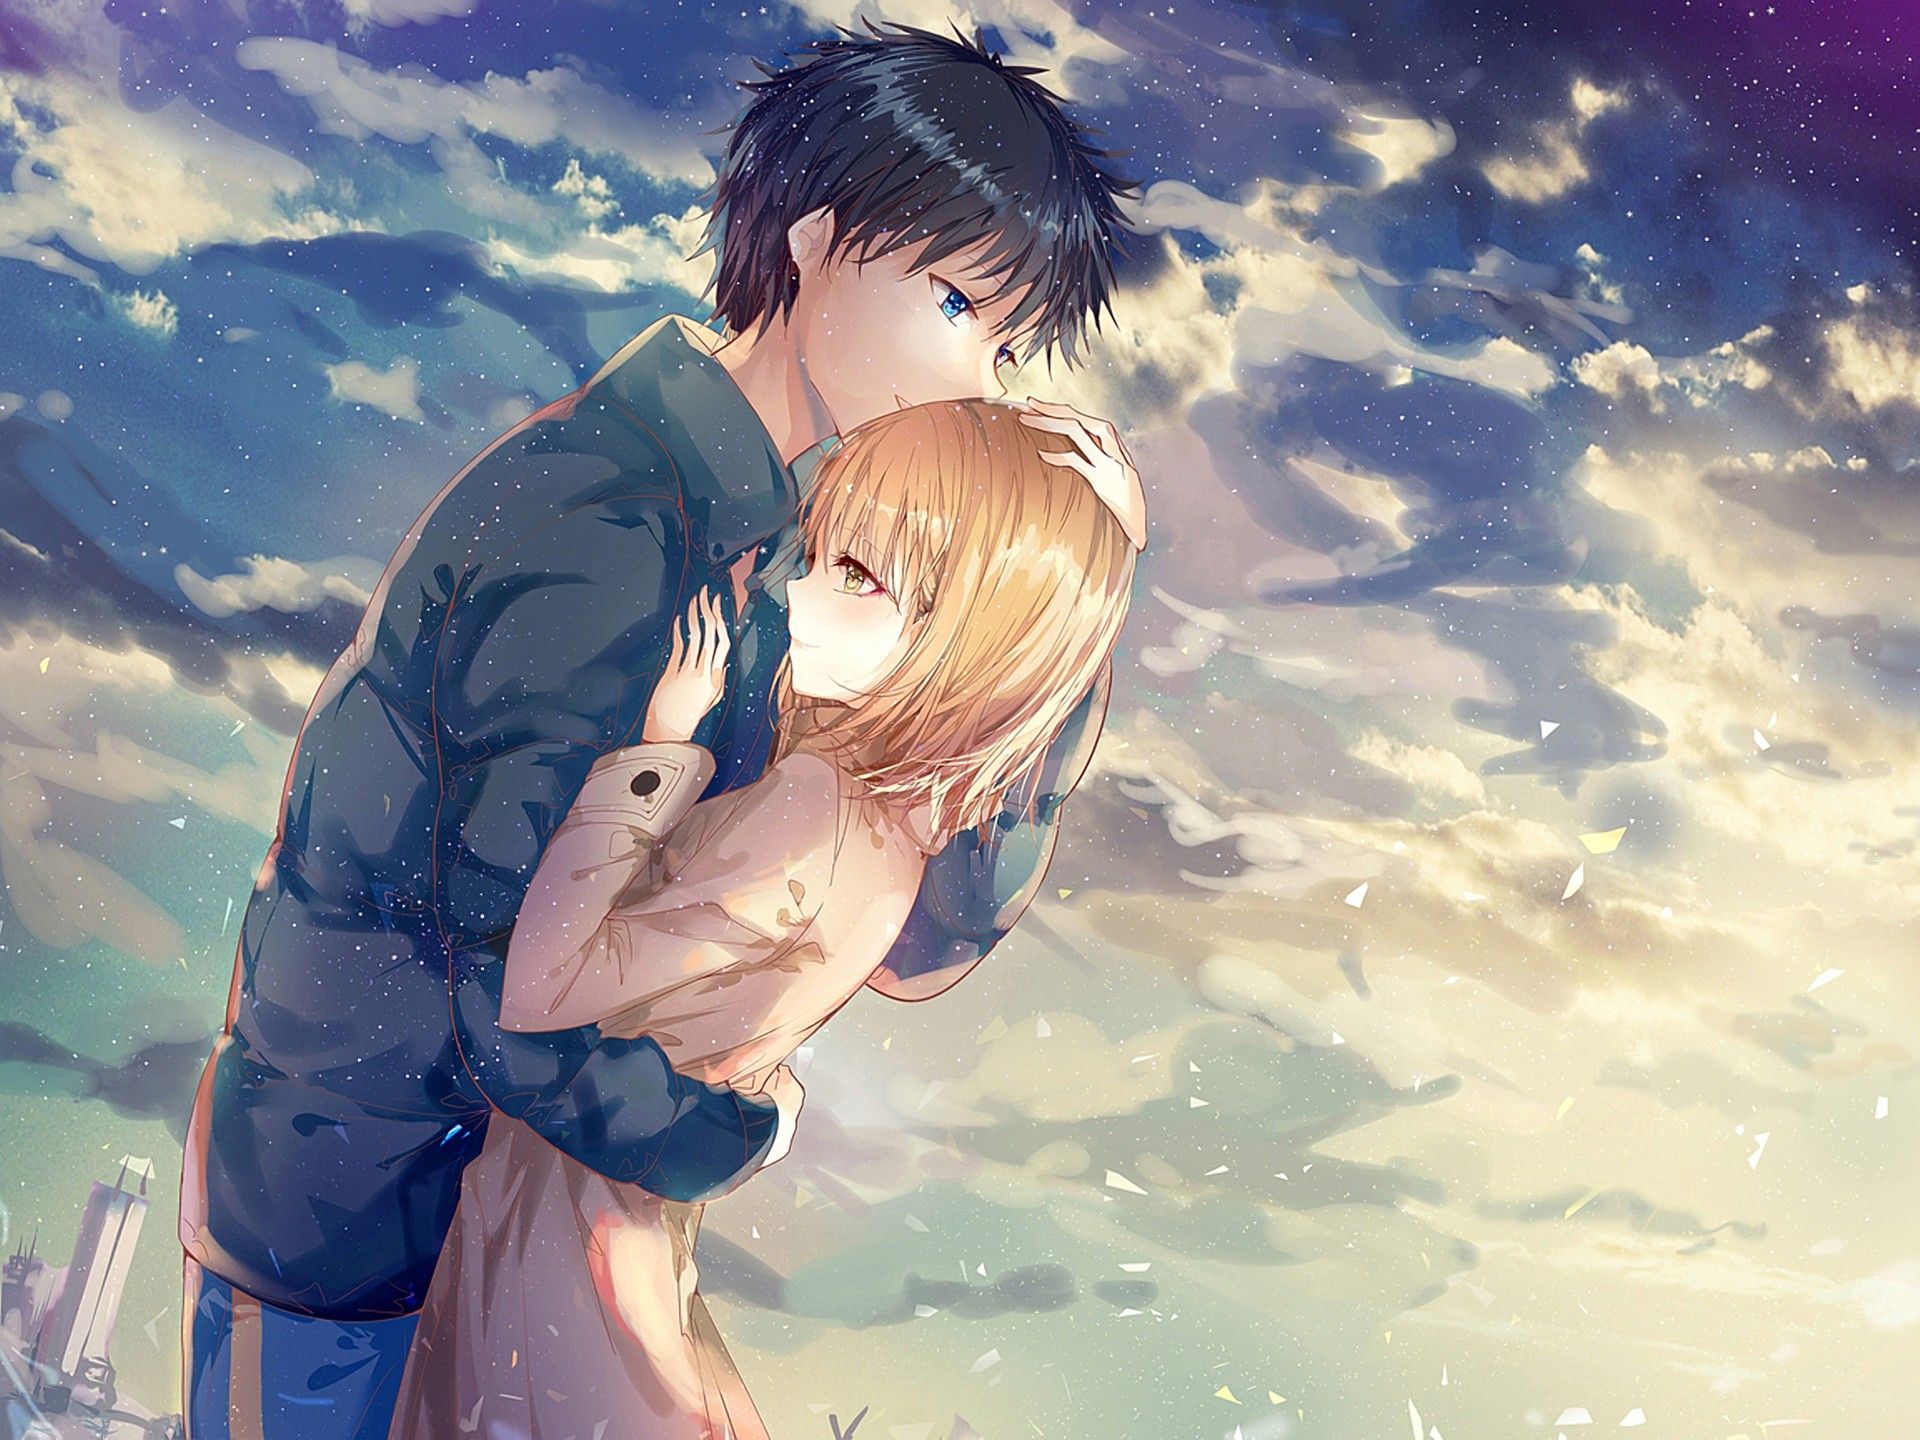 cute couple anime Picture #113443339 | Blingee.com